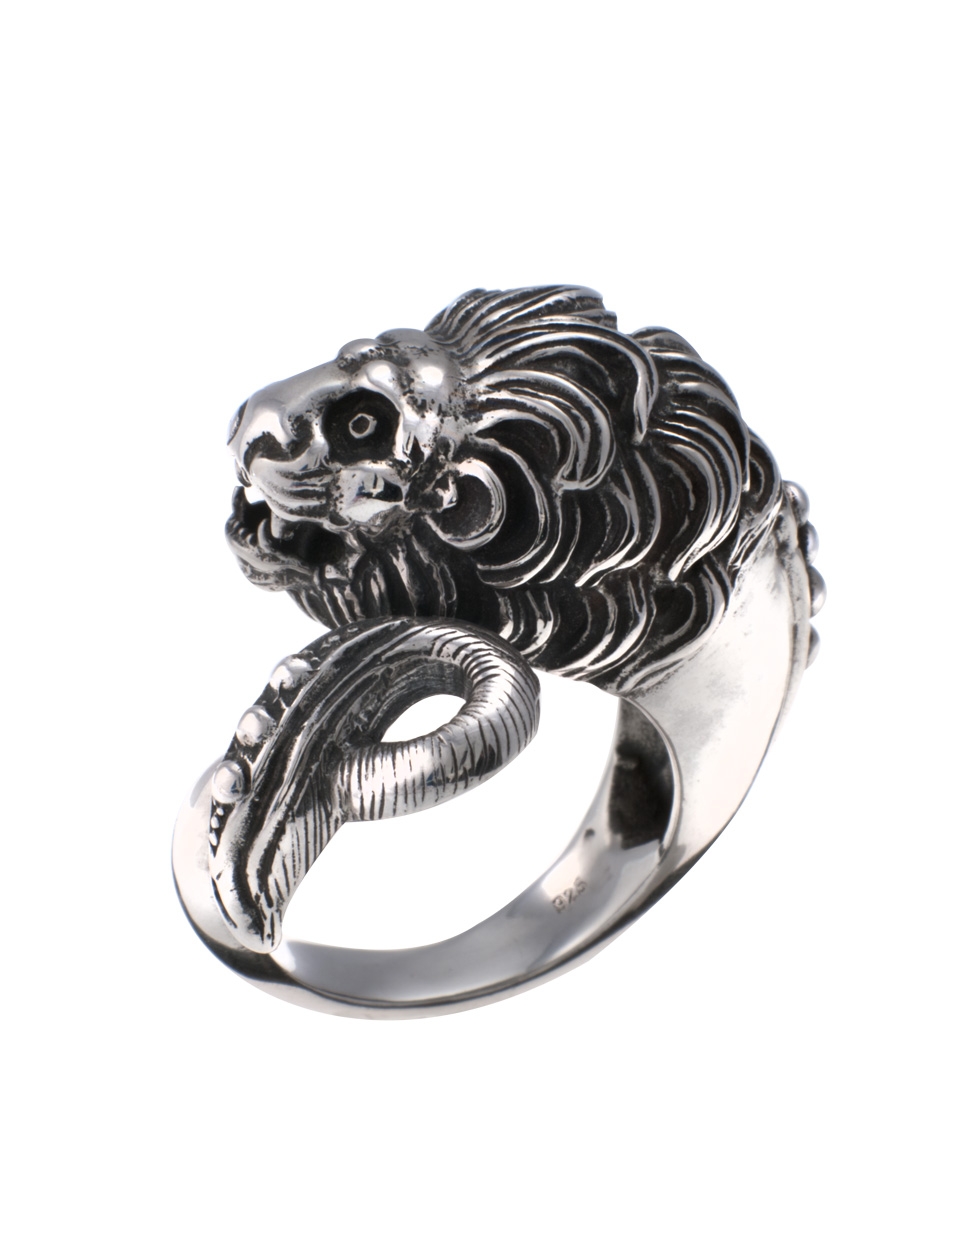 Greek Jewelry Shop - Rings - Large vintage silver lion ring